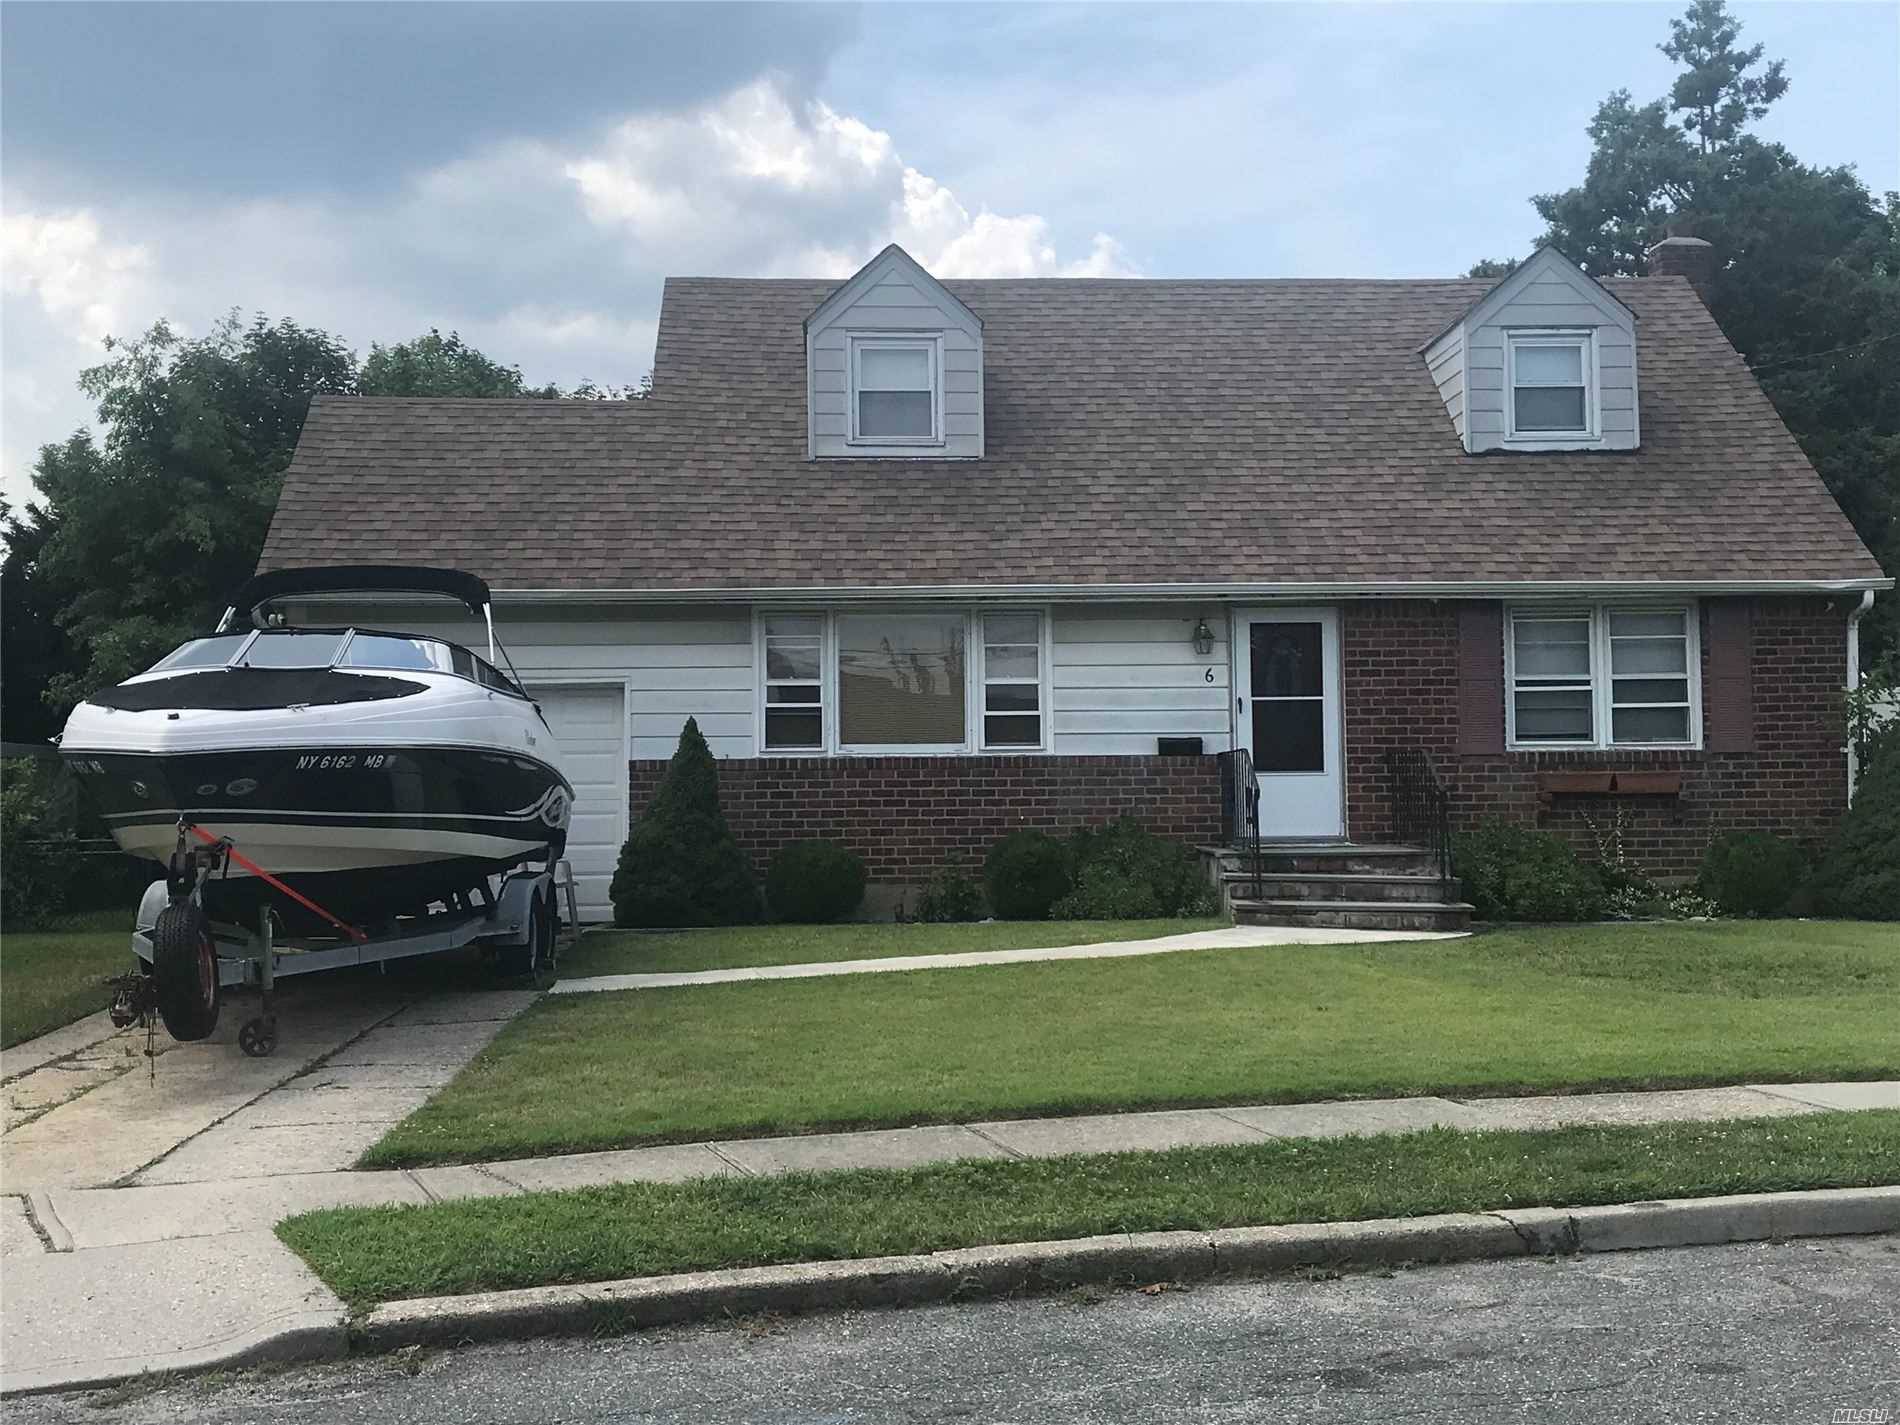 7 rooms 4 bedrooms 2 baths and upstairs bath dormer all hardwoods new roof gas heating huge lot 70x137 bethpage school district 21 garage and driveway mint !